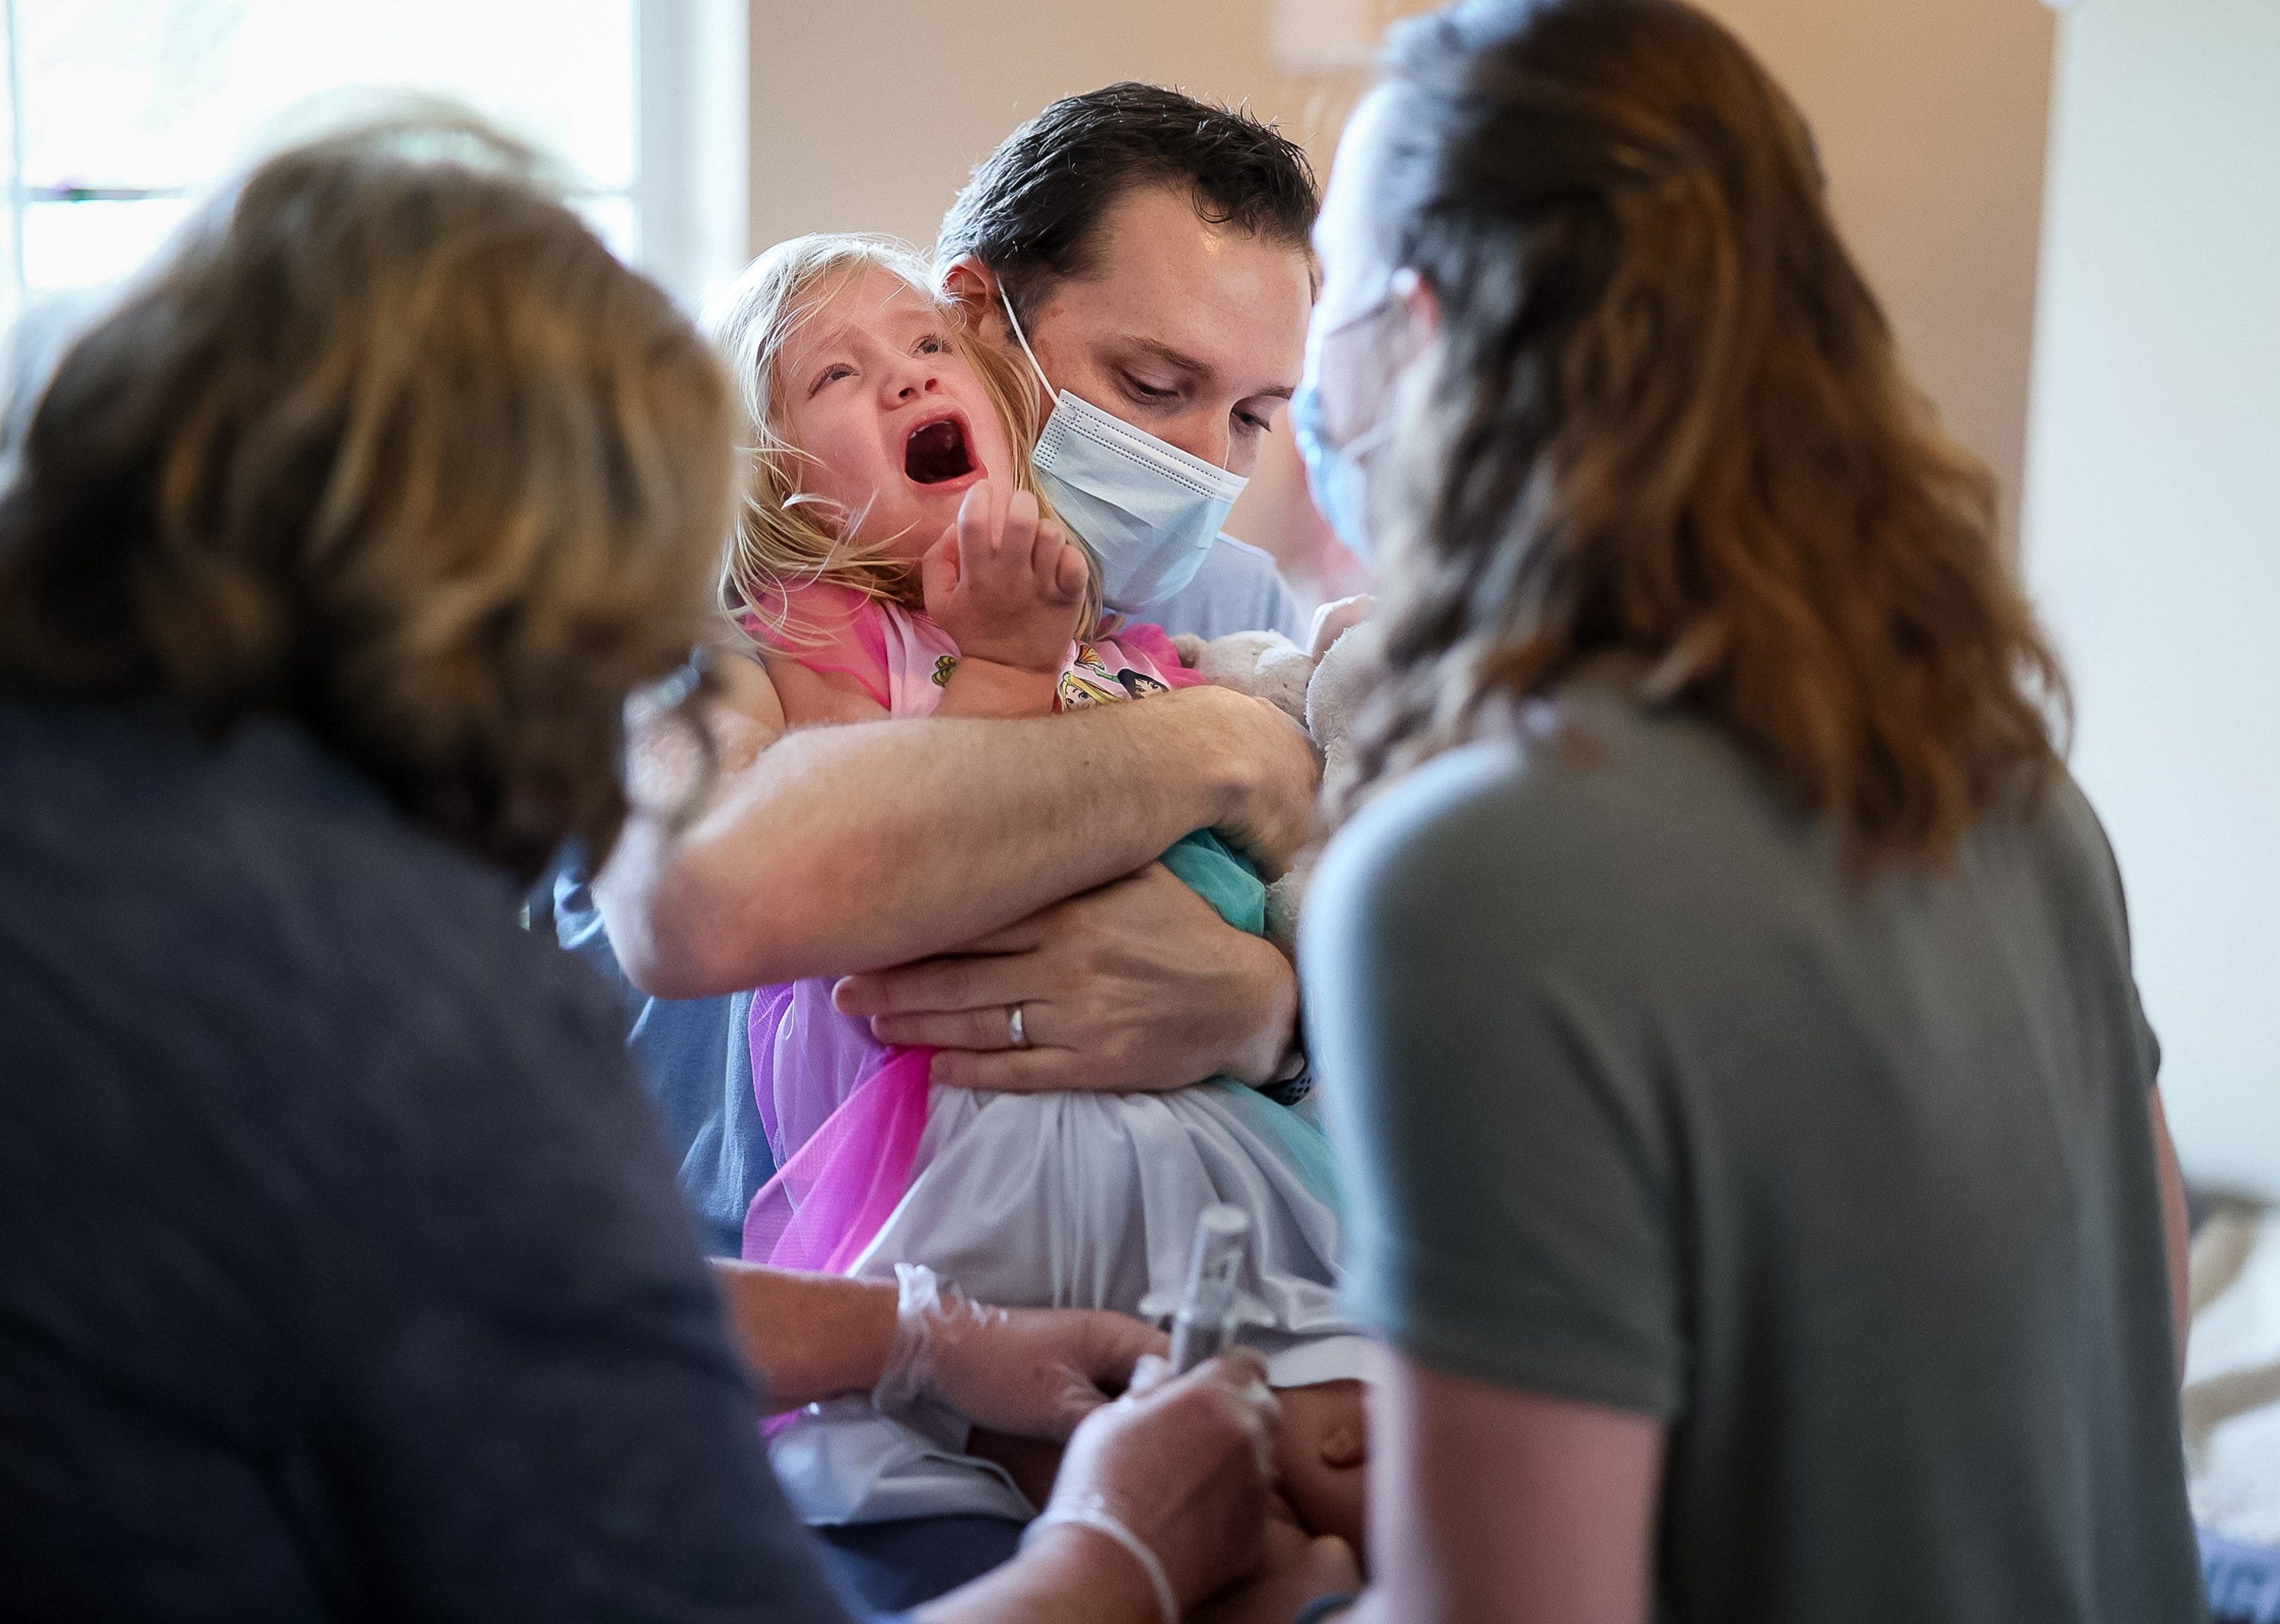 Sarah, right, and Robbie Turner help hold their daughter Emilia, 3, as a visiting nurse administers a shot at their home in Jupiter.